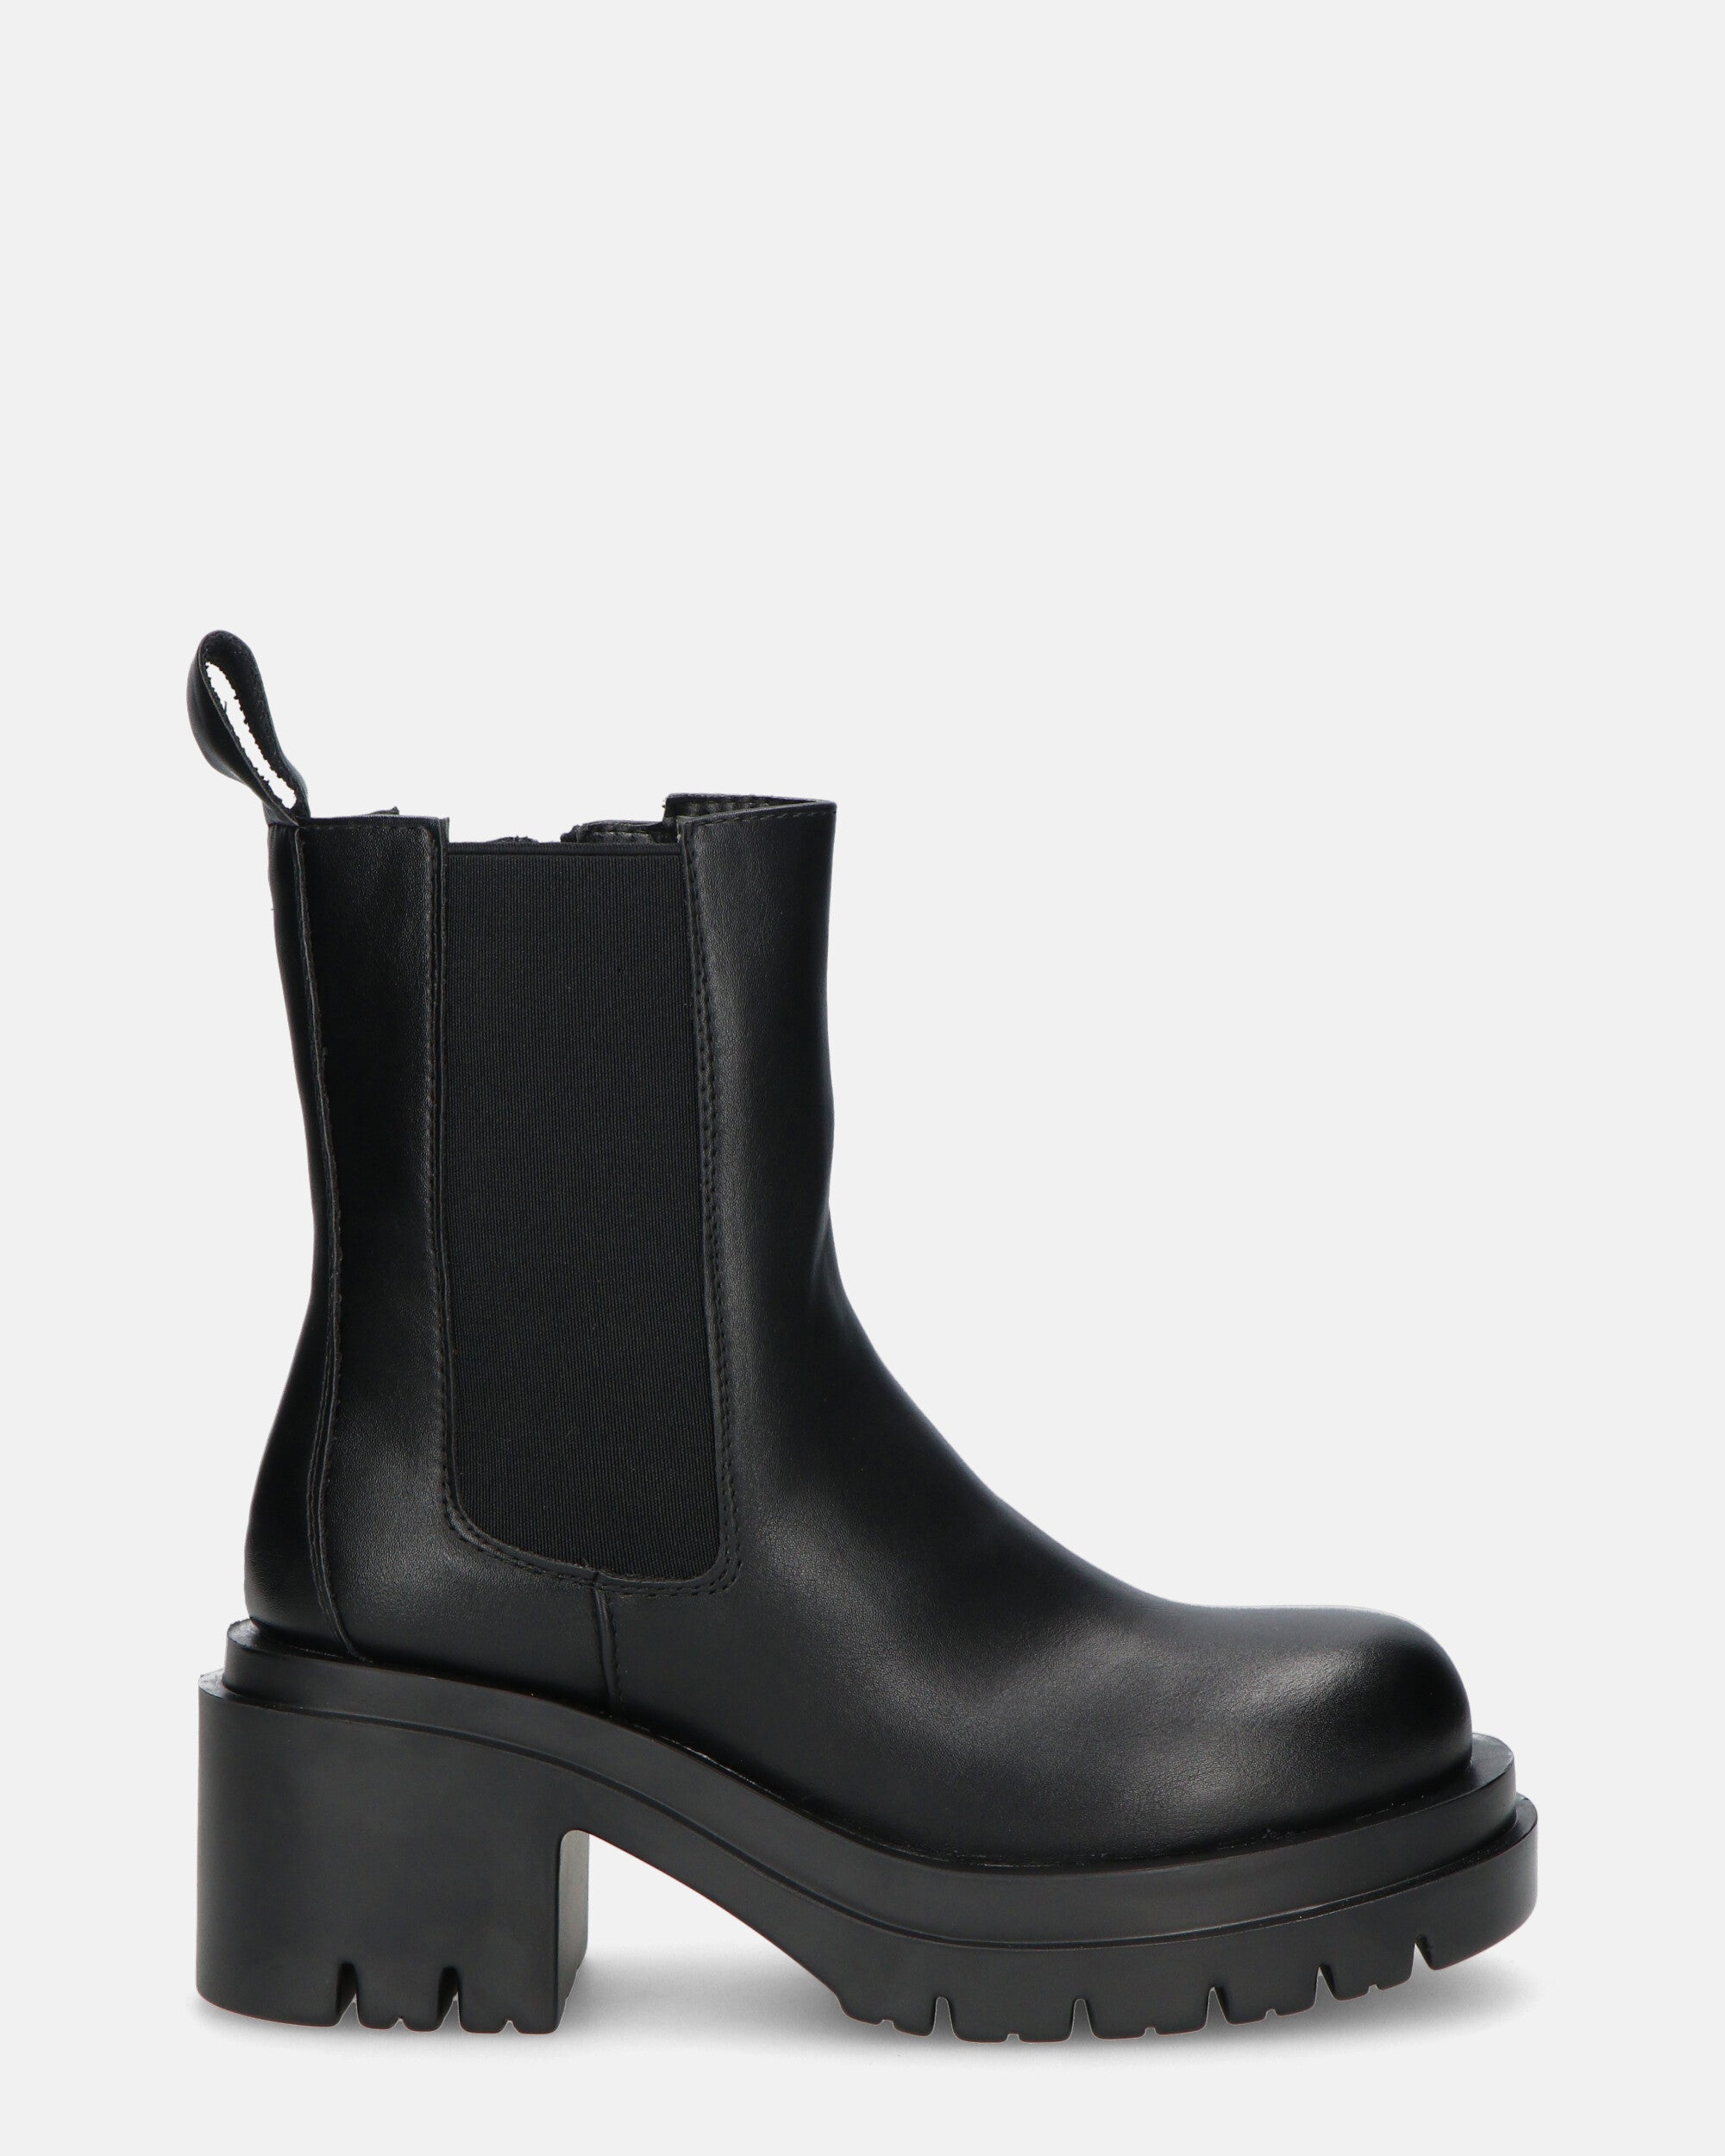 PRISCA - black ankle boots with elastic band and side zip